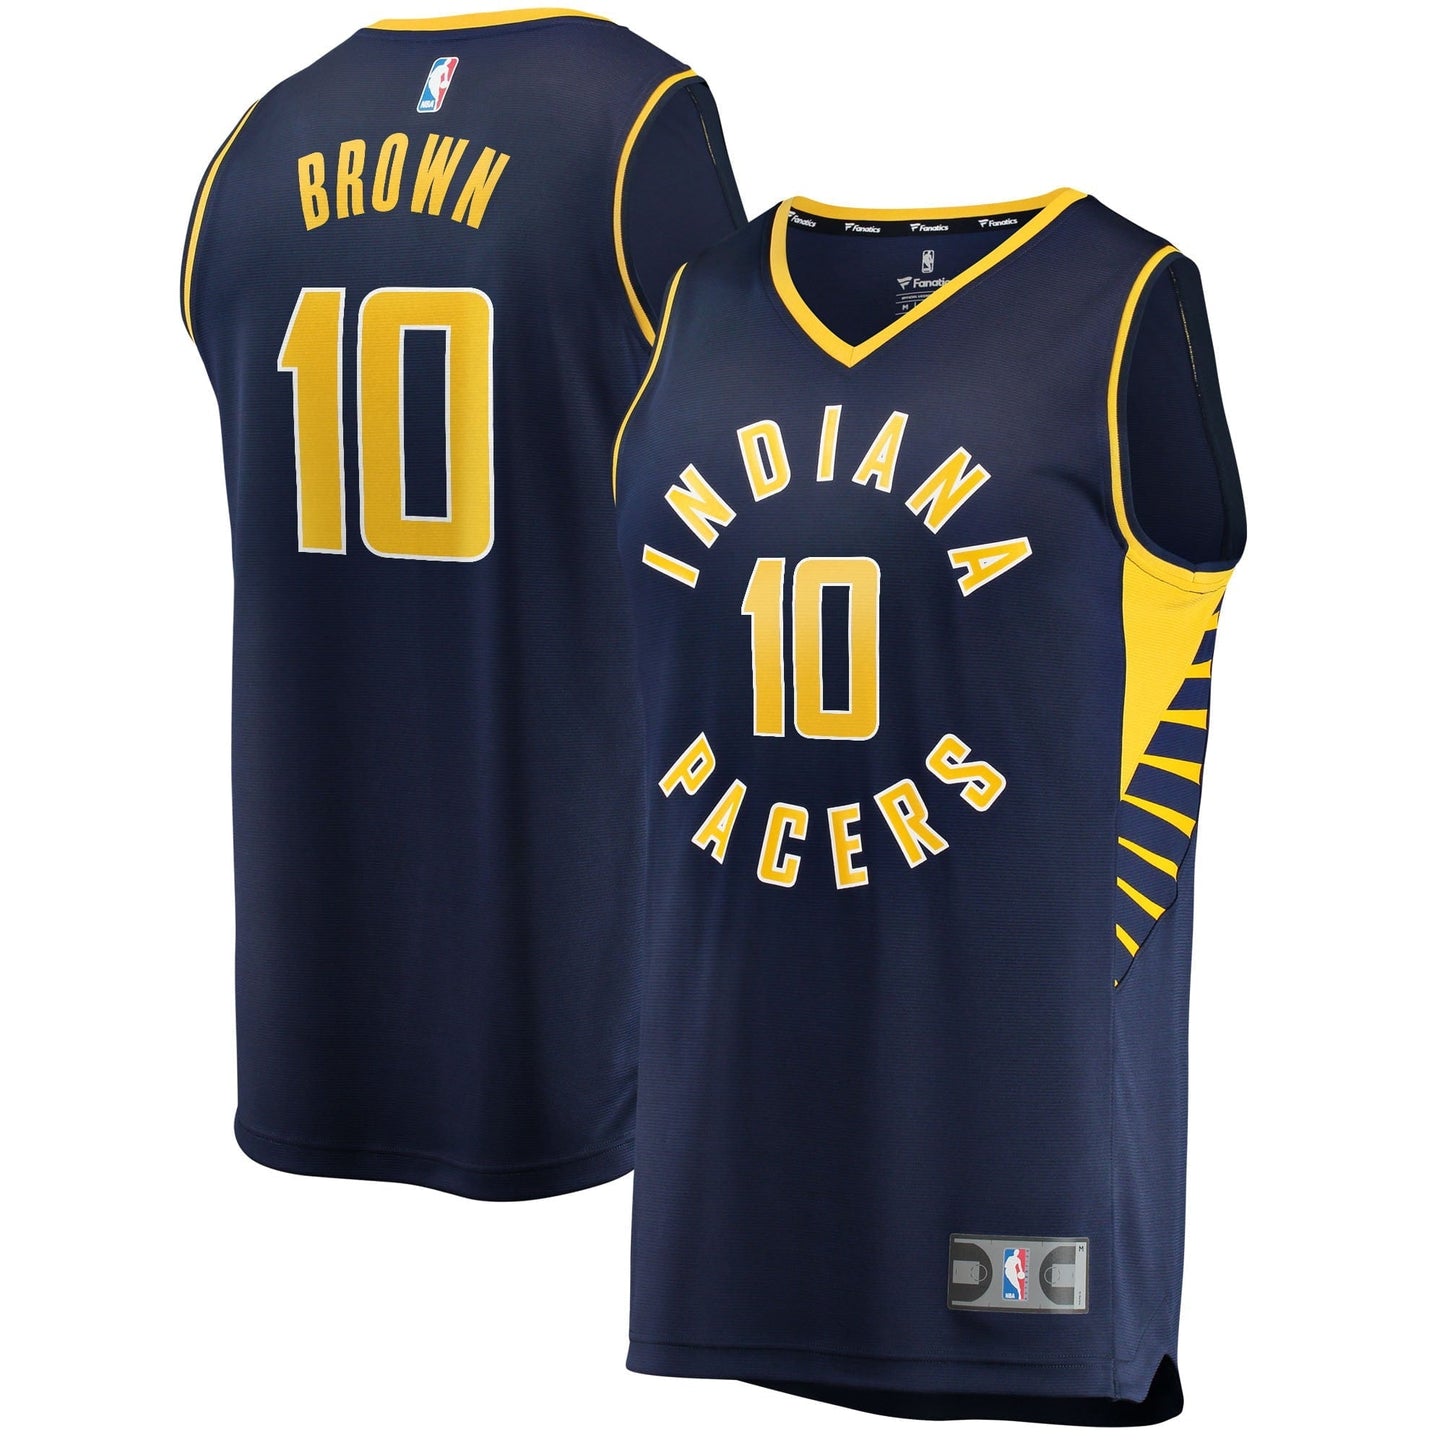 Men's Fanatics Branded Kendall Brown Navy Indiana Pacers 2021/22 Fast Break Replica Jersey - Icon Edition